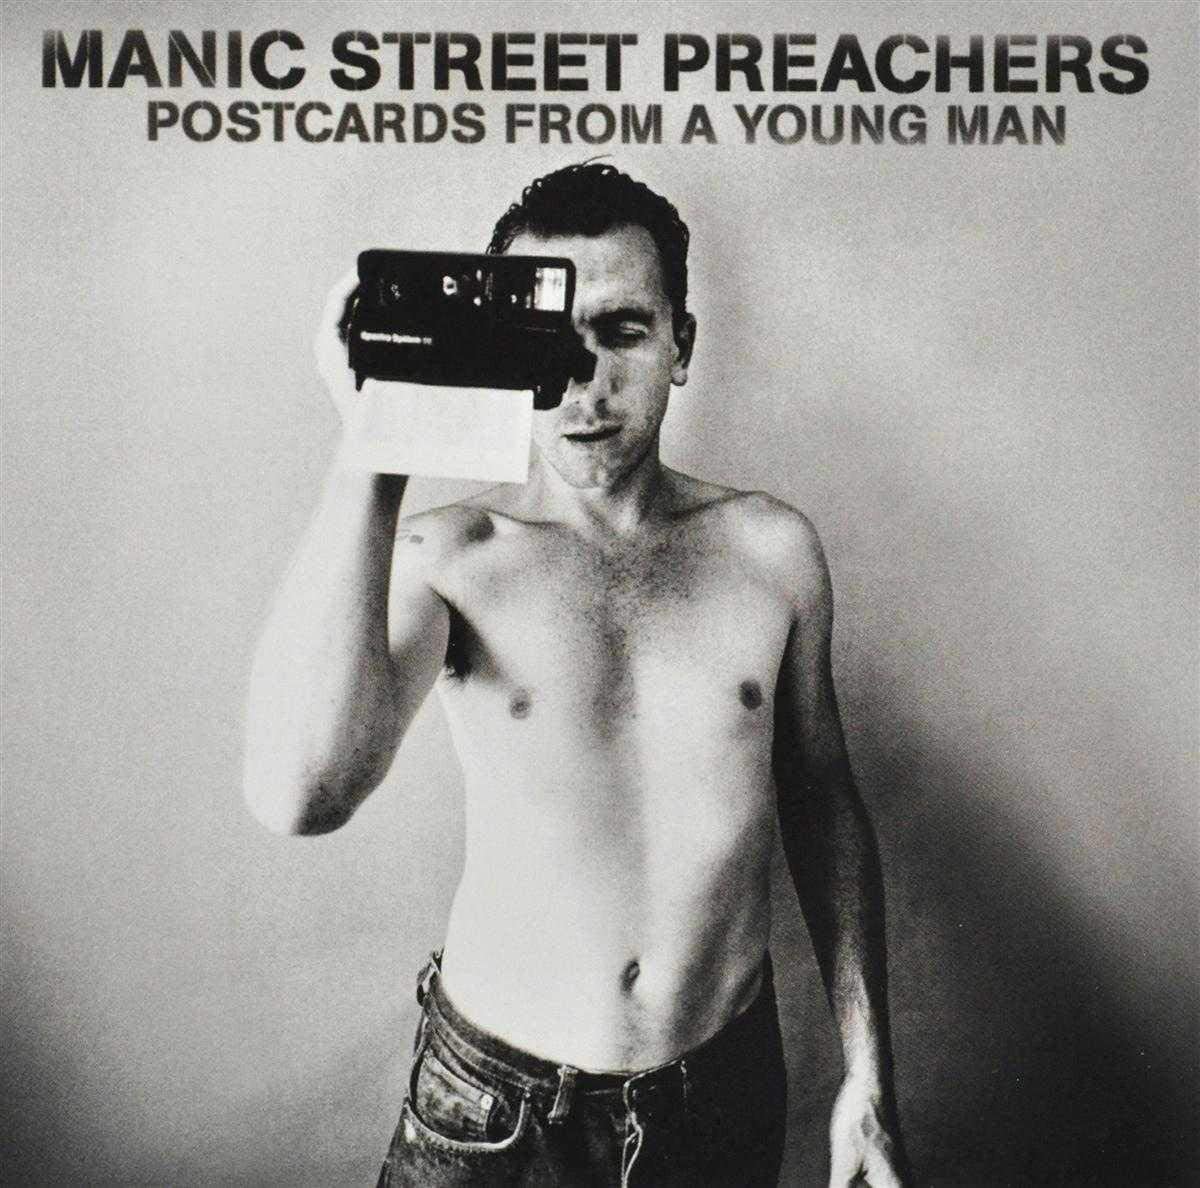 Manic Street Preachers Postcards From a Young Man cover artwork